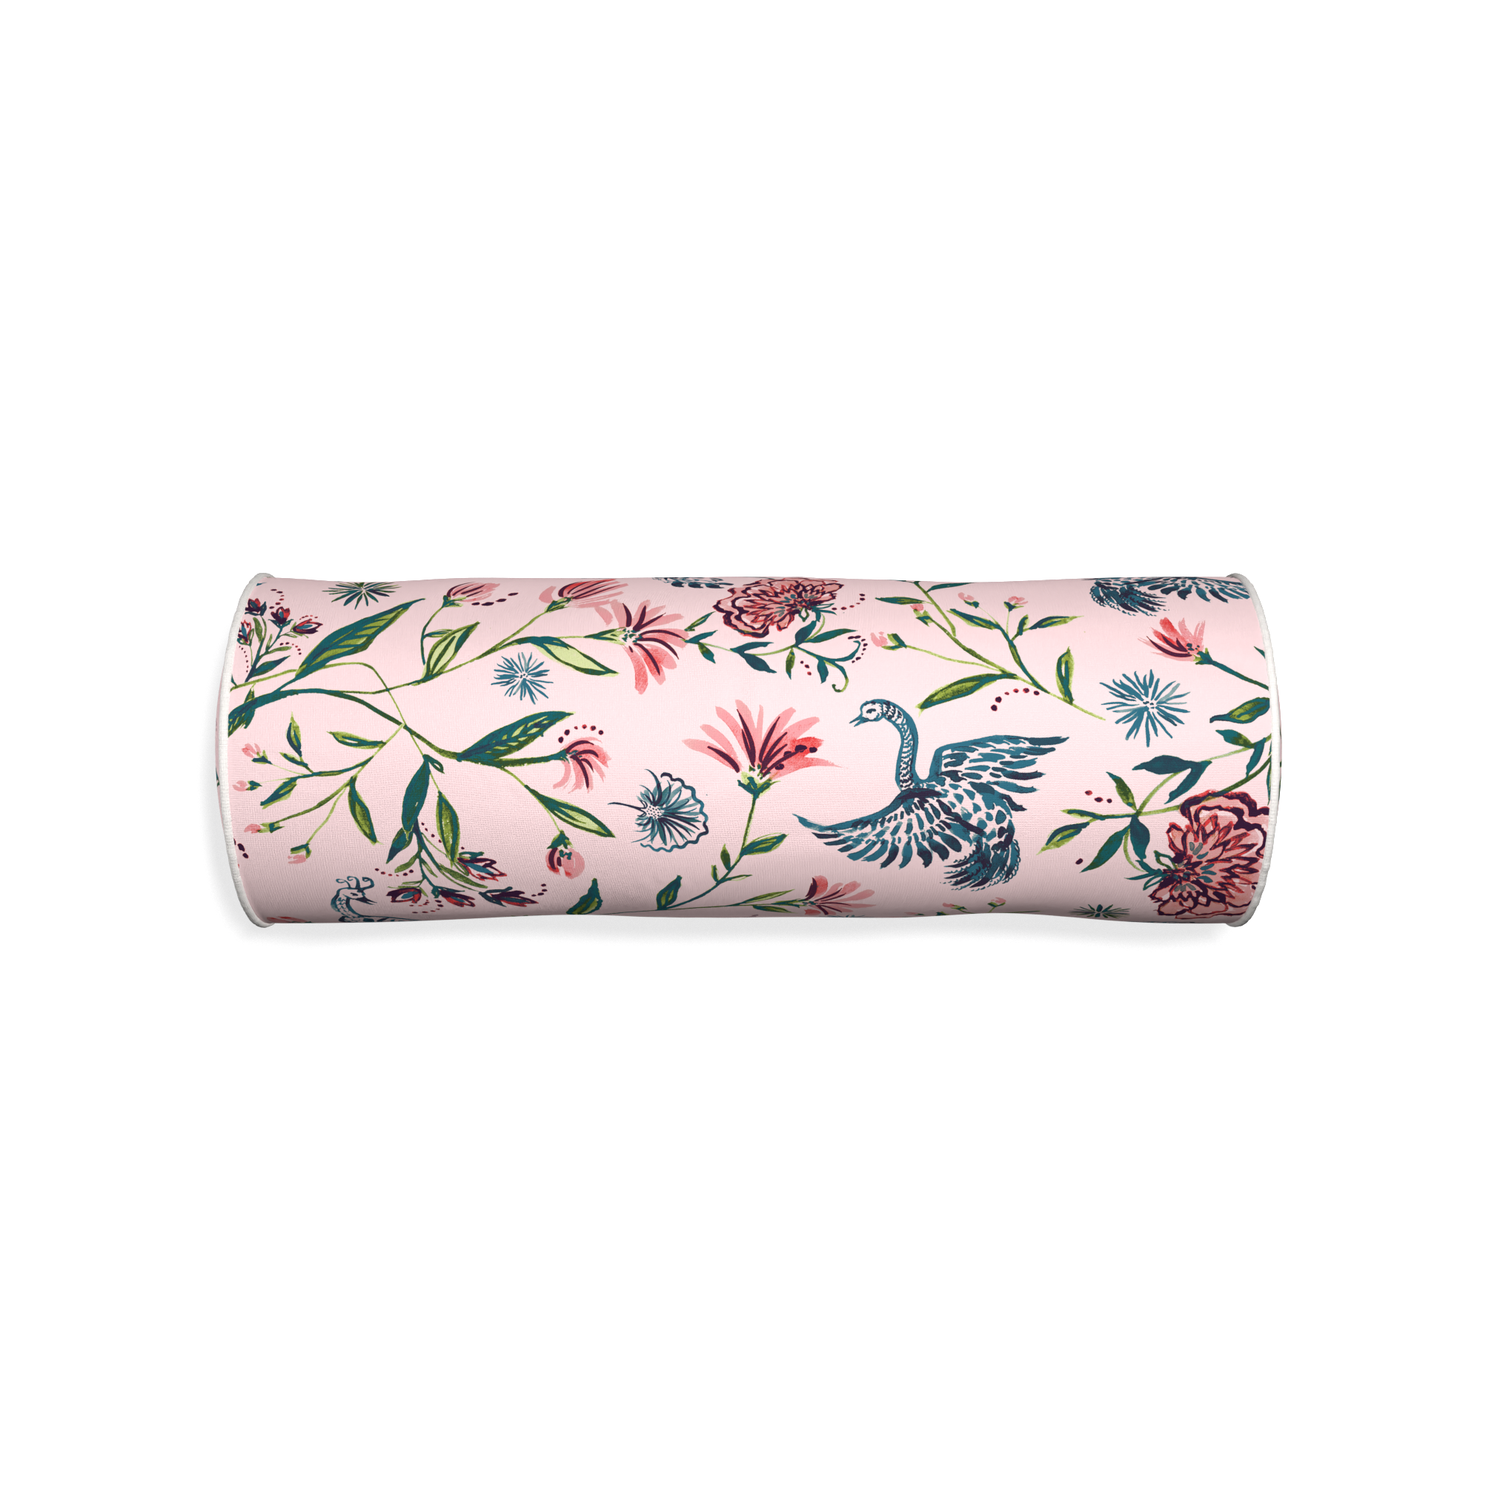 Bolster daphne rose custom rose chinoiseriepillow with snow piping on white background